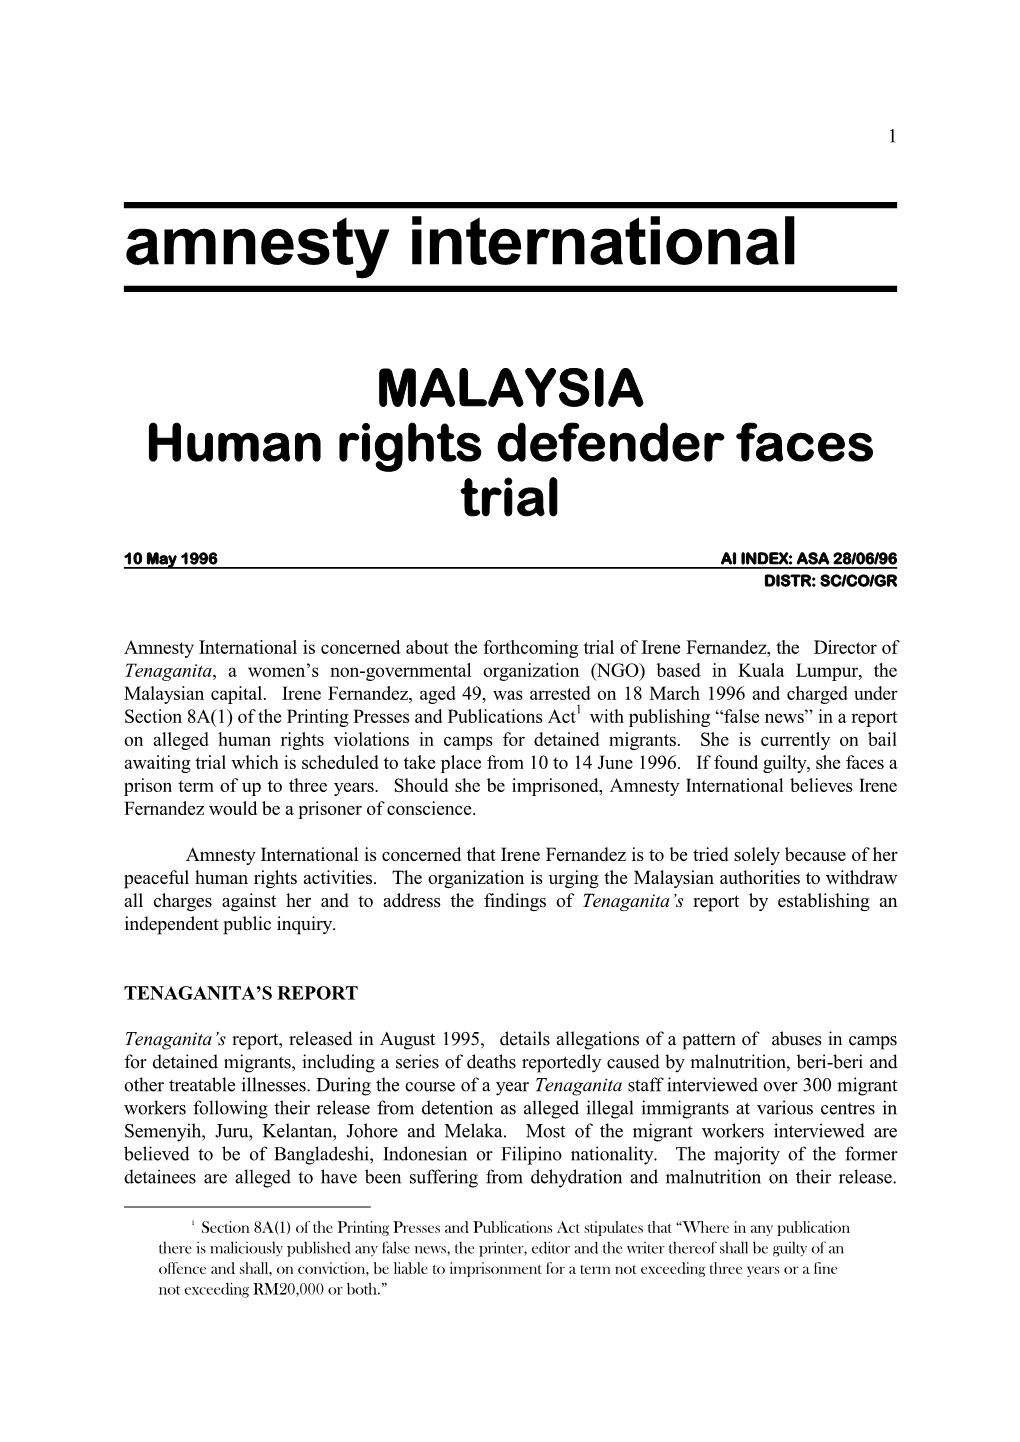 Amnesty International MALAYSIA Human Rights Defender Faces Trial